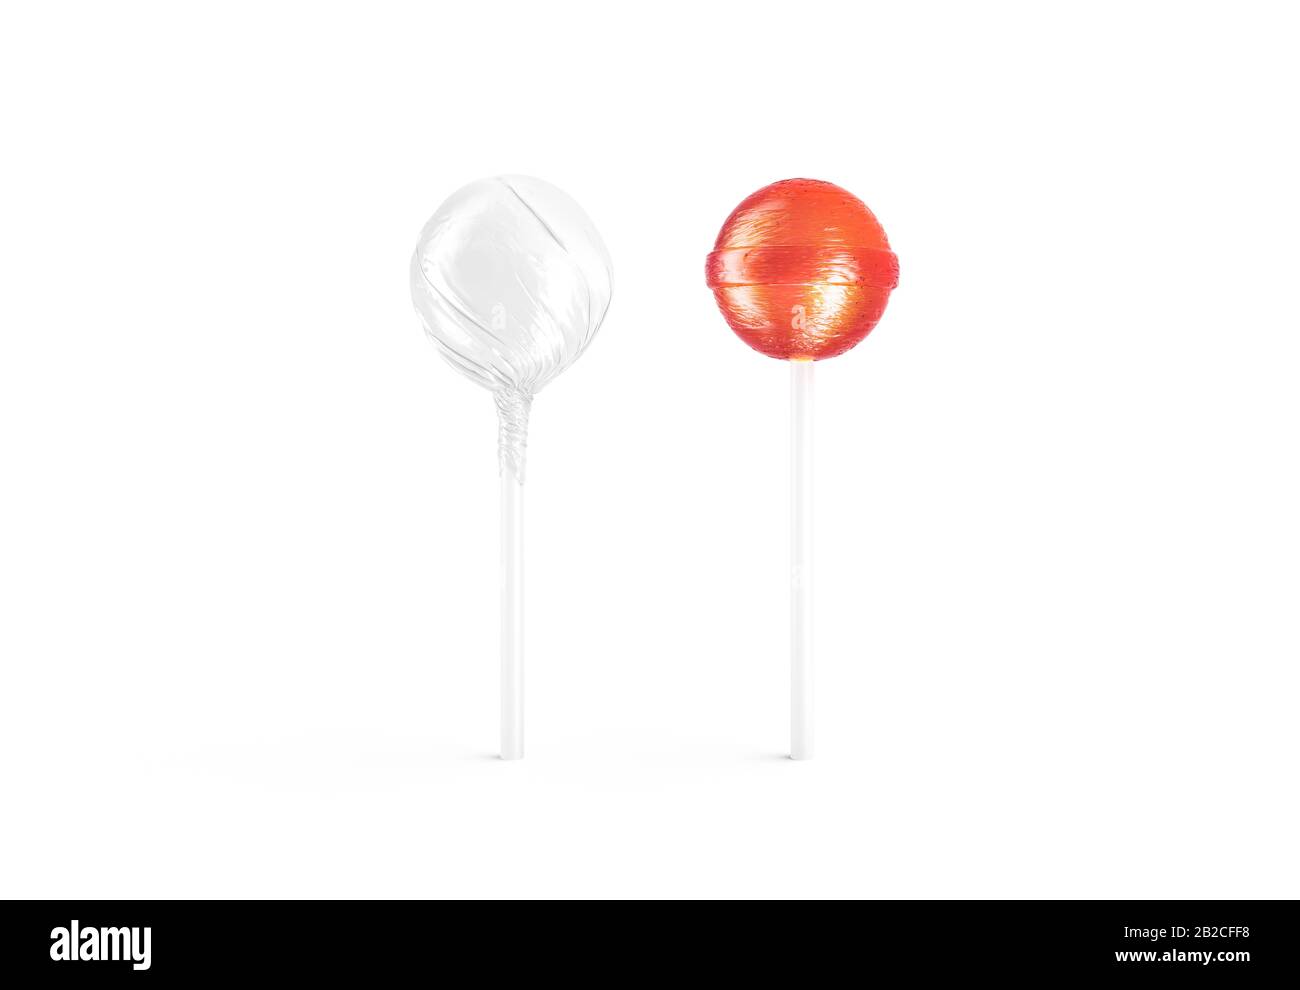 Blank two caramel lollipop with white wrapper mockup, front view Stock Photo